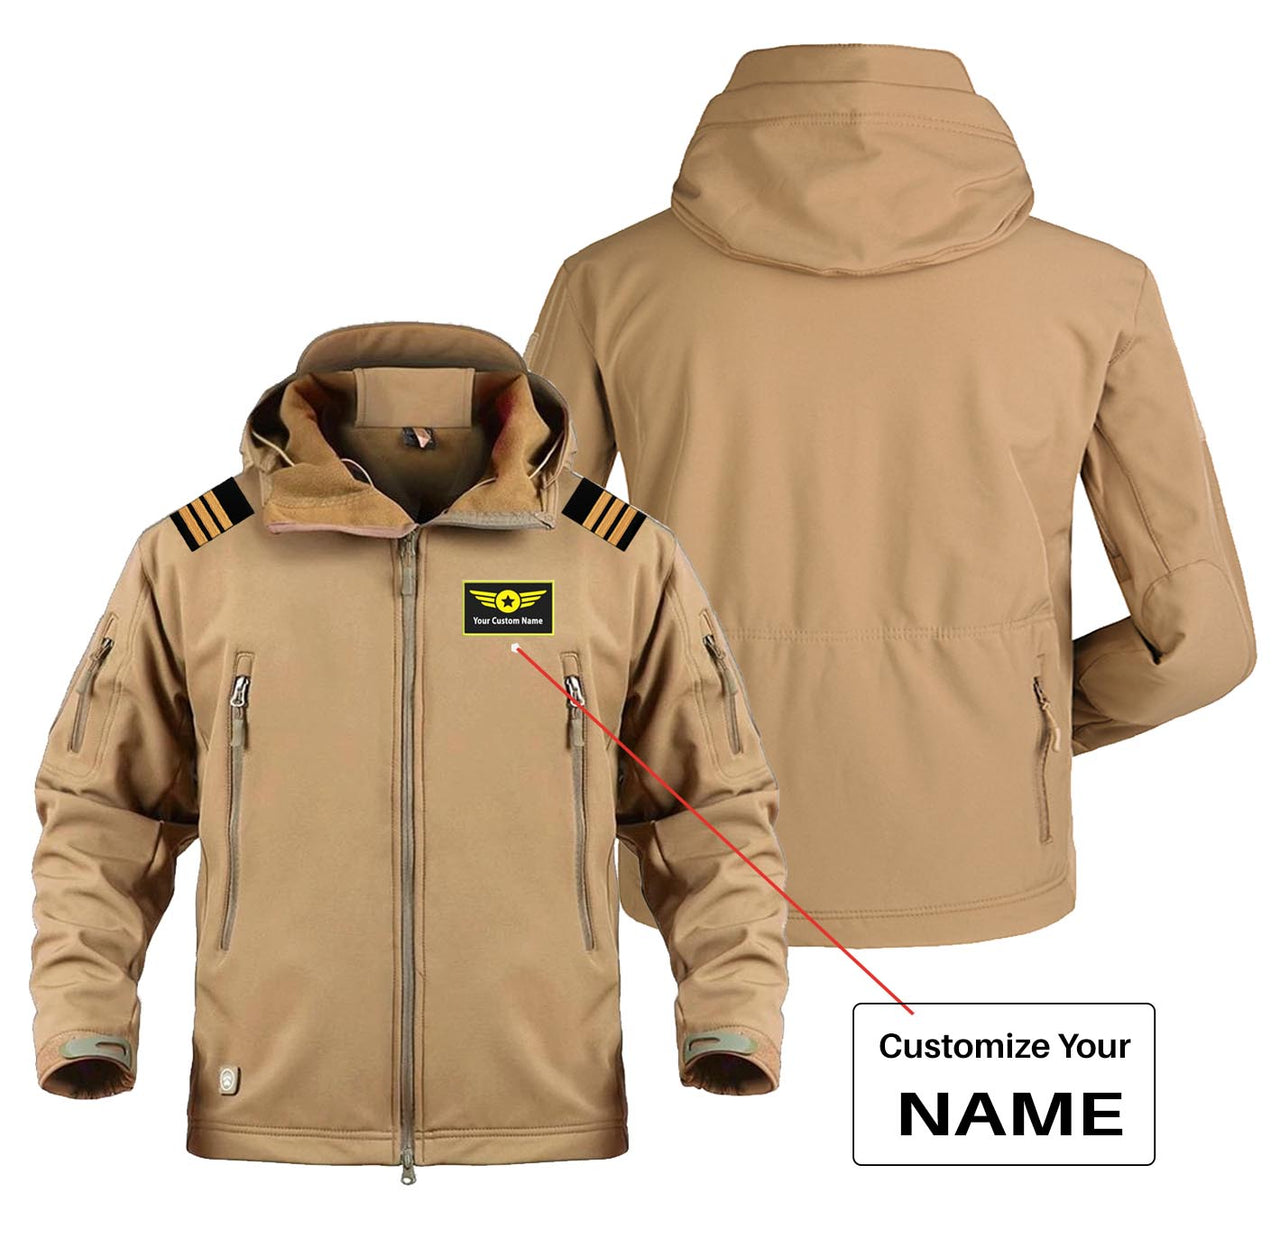 Custom Name with EPAULETTES (Special Badge) Military Pilot Jackets